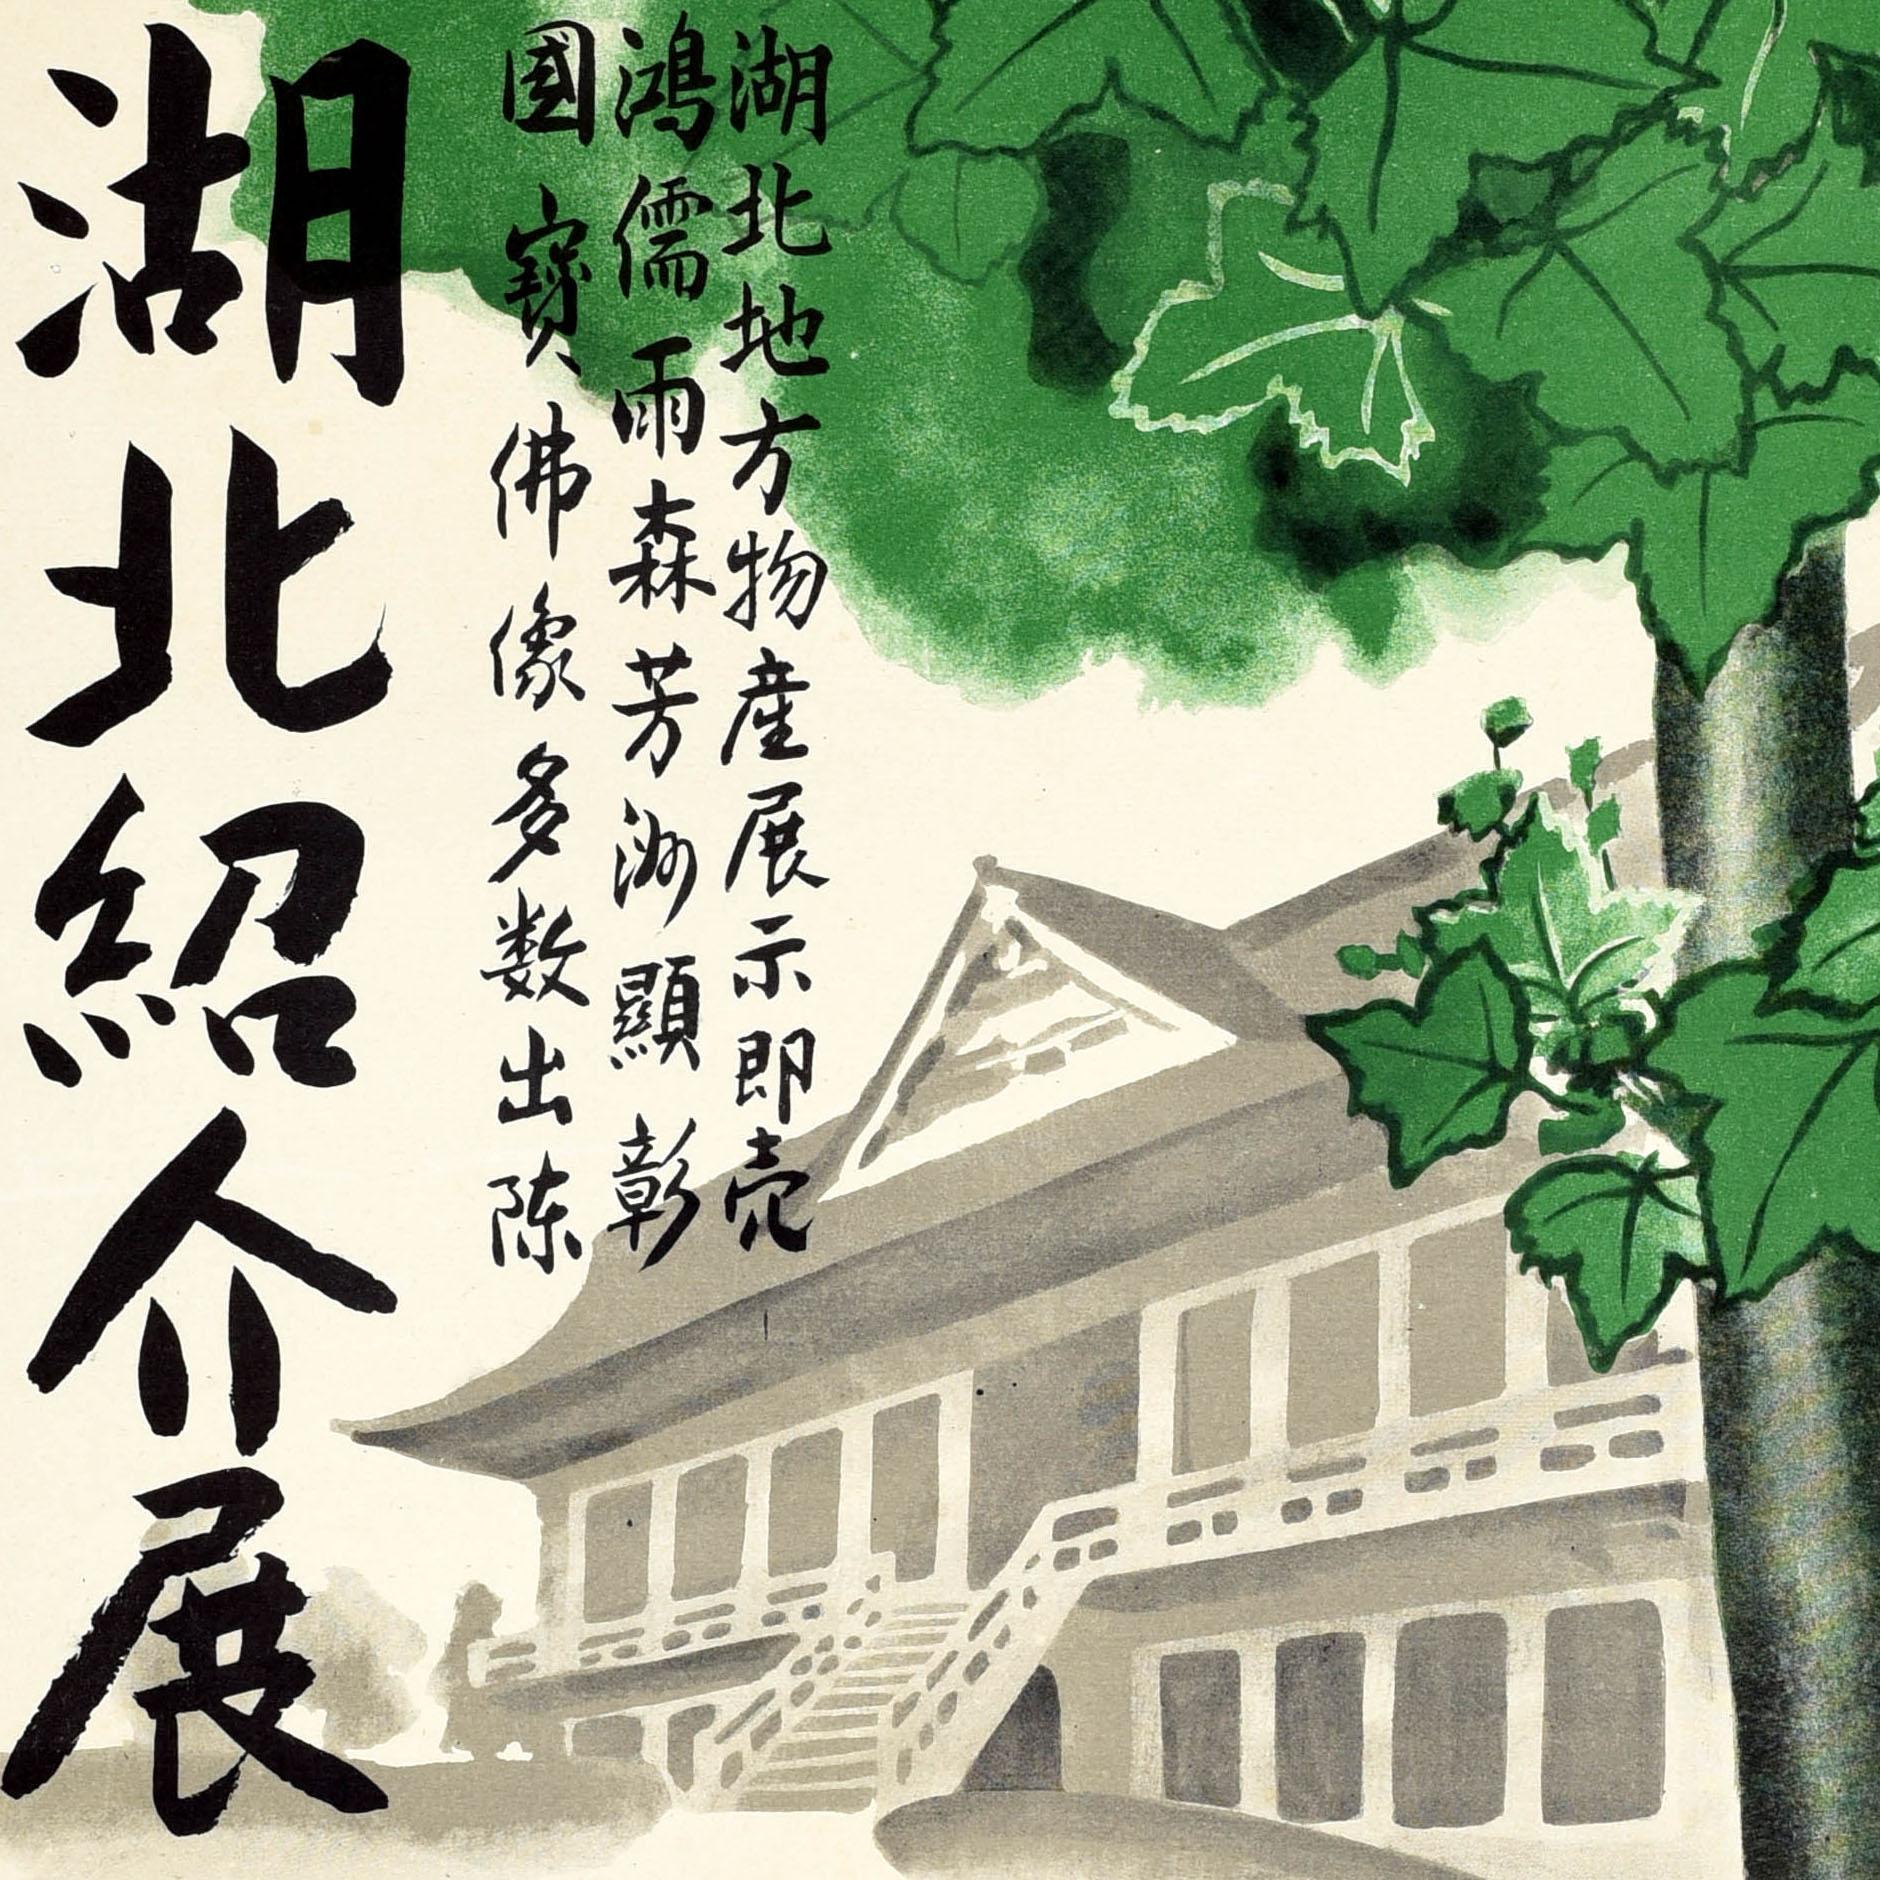 Original vintage poster advertising the Eighth Local Artefacts Exhibition in Otsu City (Shiga Prefecture Japan) featuring a leafy green tree in front of a traditional old style Japanese building in the background, the text in black characters down